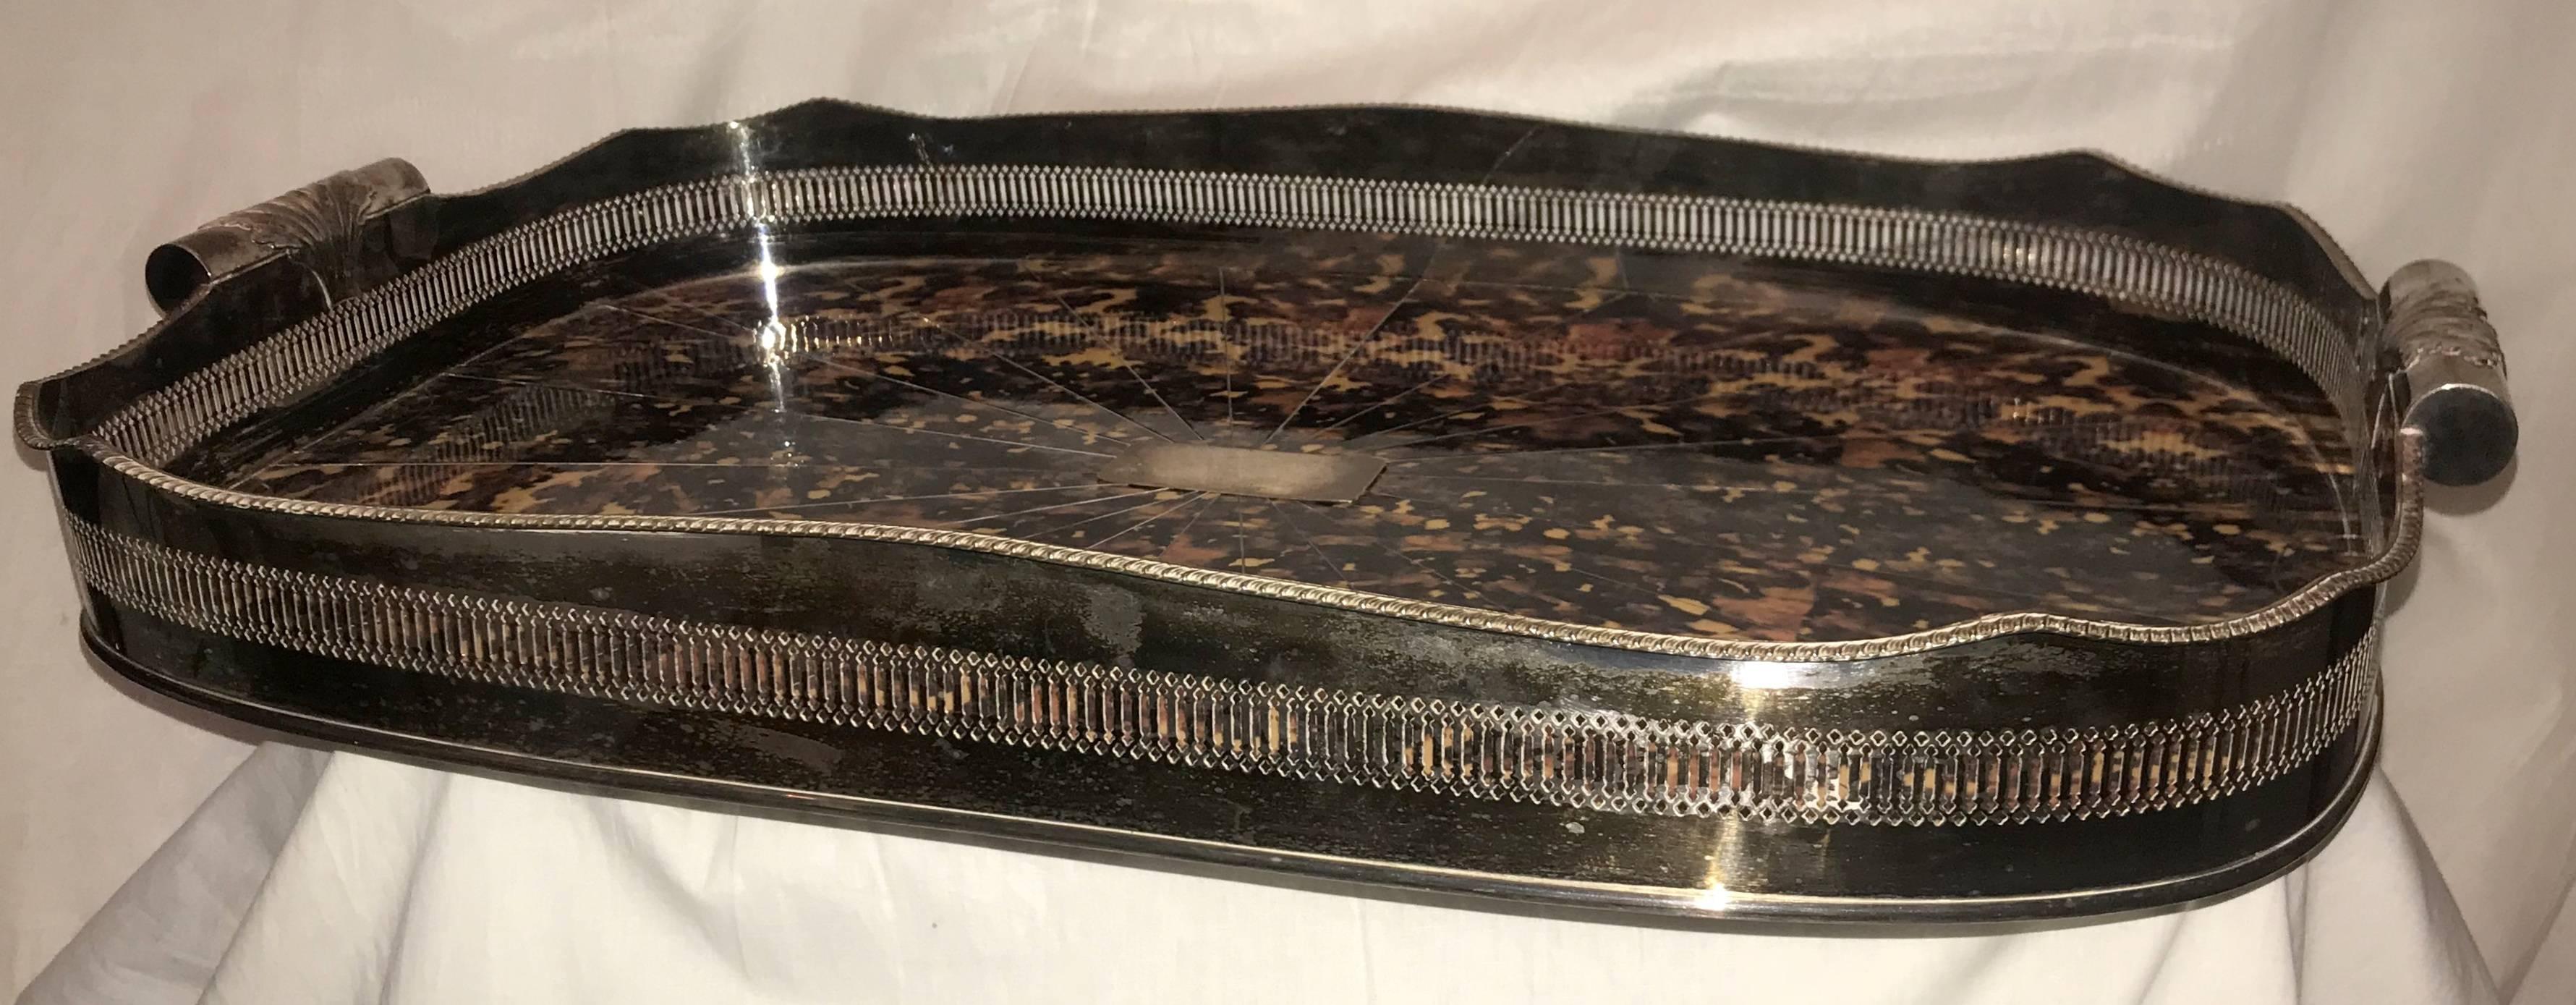 A wonderful large English faux tortoise shell silver plated serving gallery tray, great for tea, coffee, or cocktails or just to sit on an ottoman. This beautiful serving piece has a prominent pierced and scalloped gallery and tooled with intricate